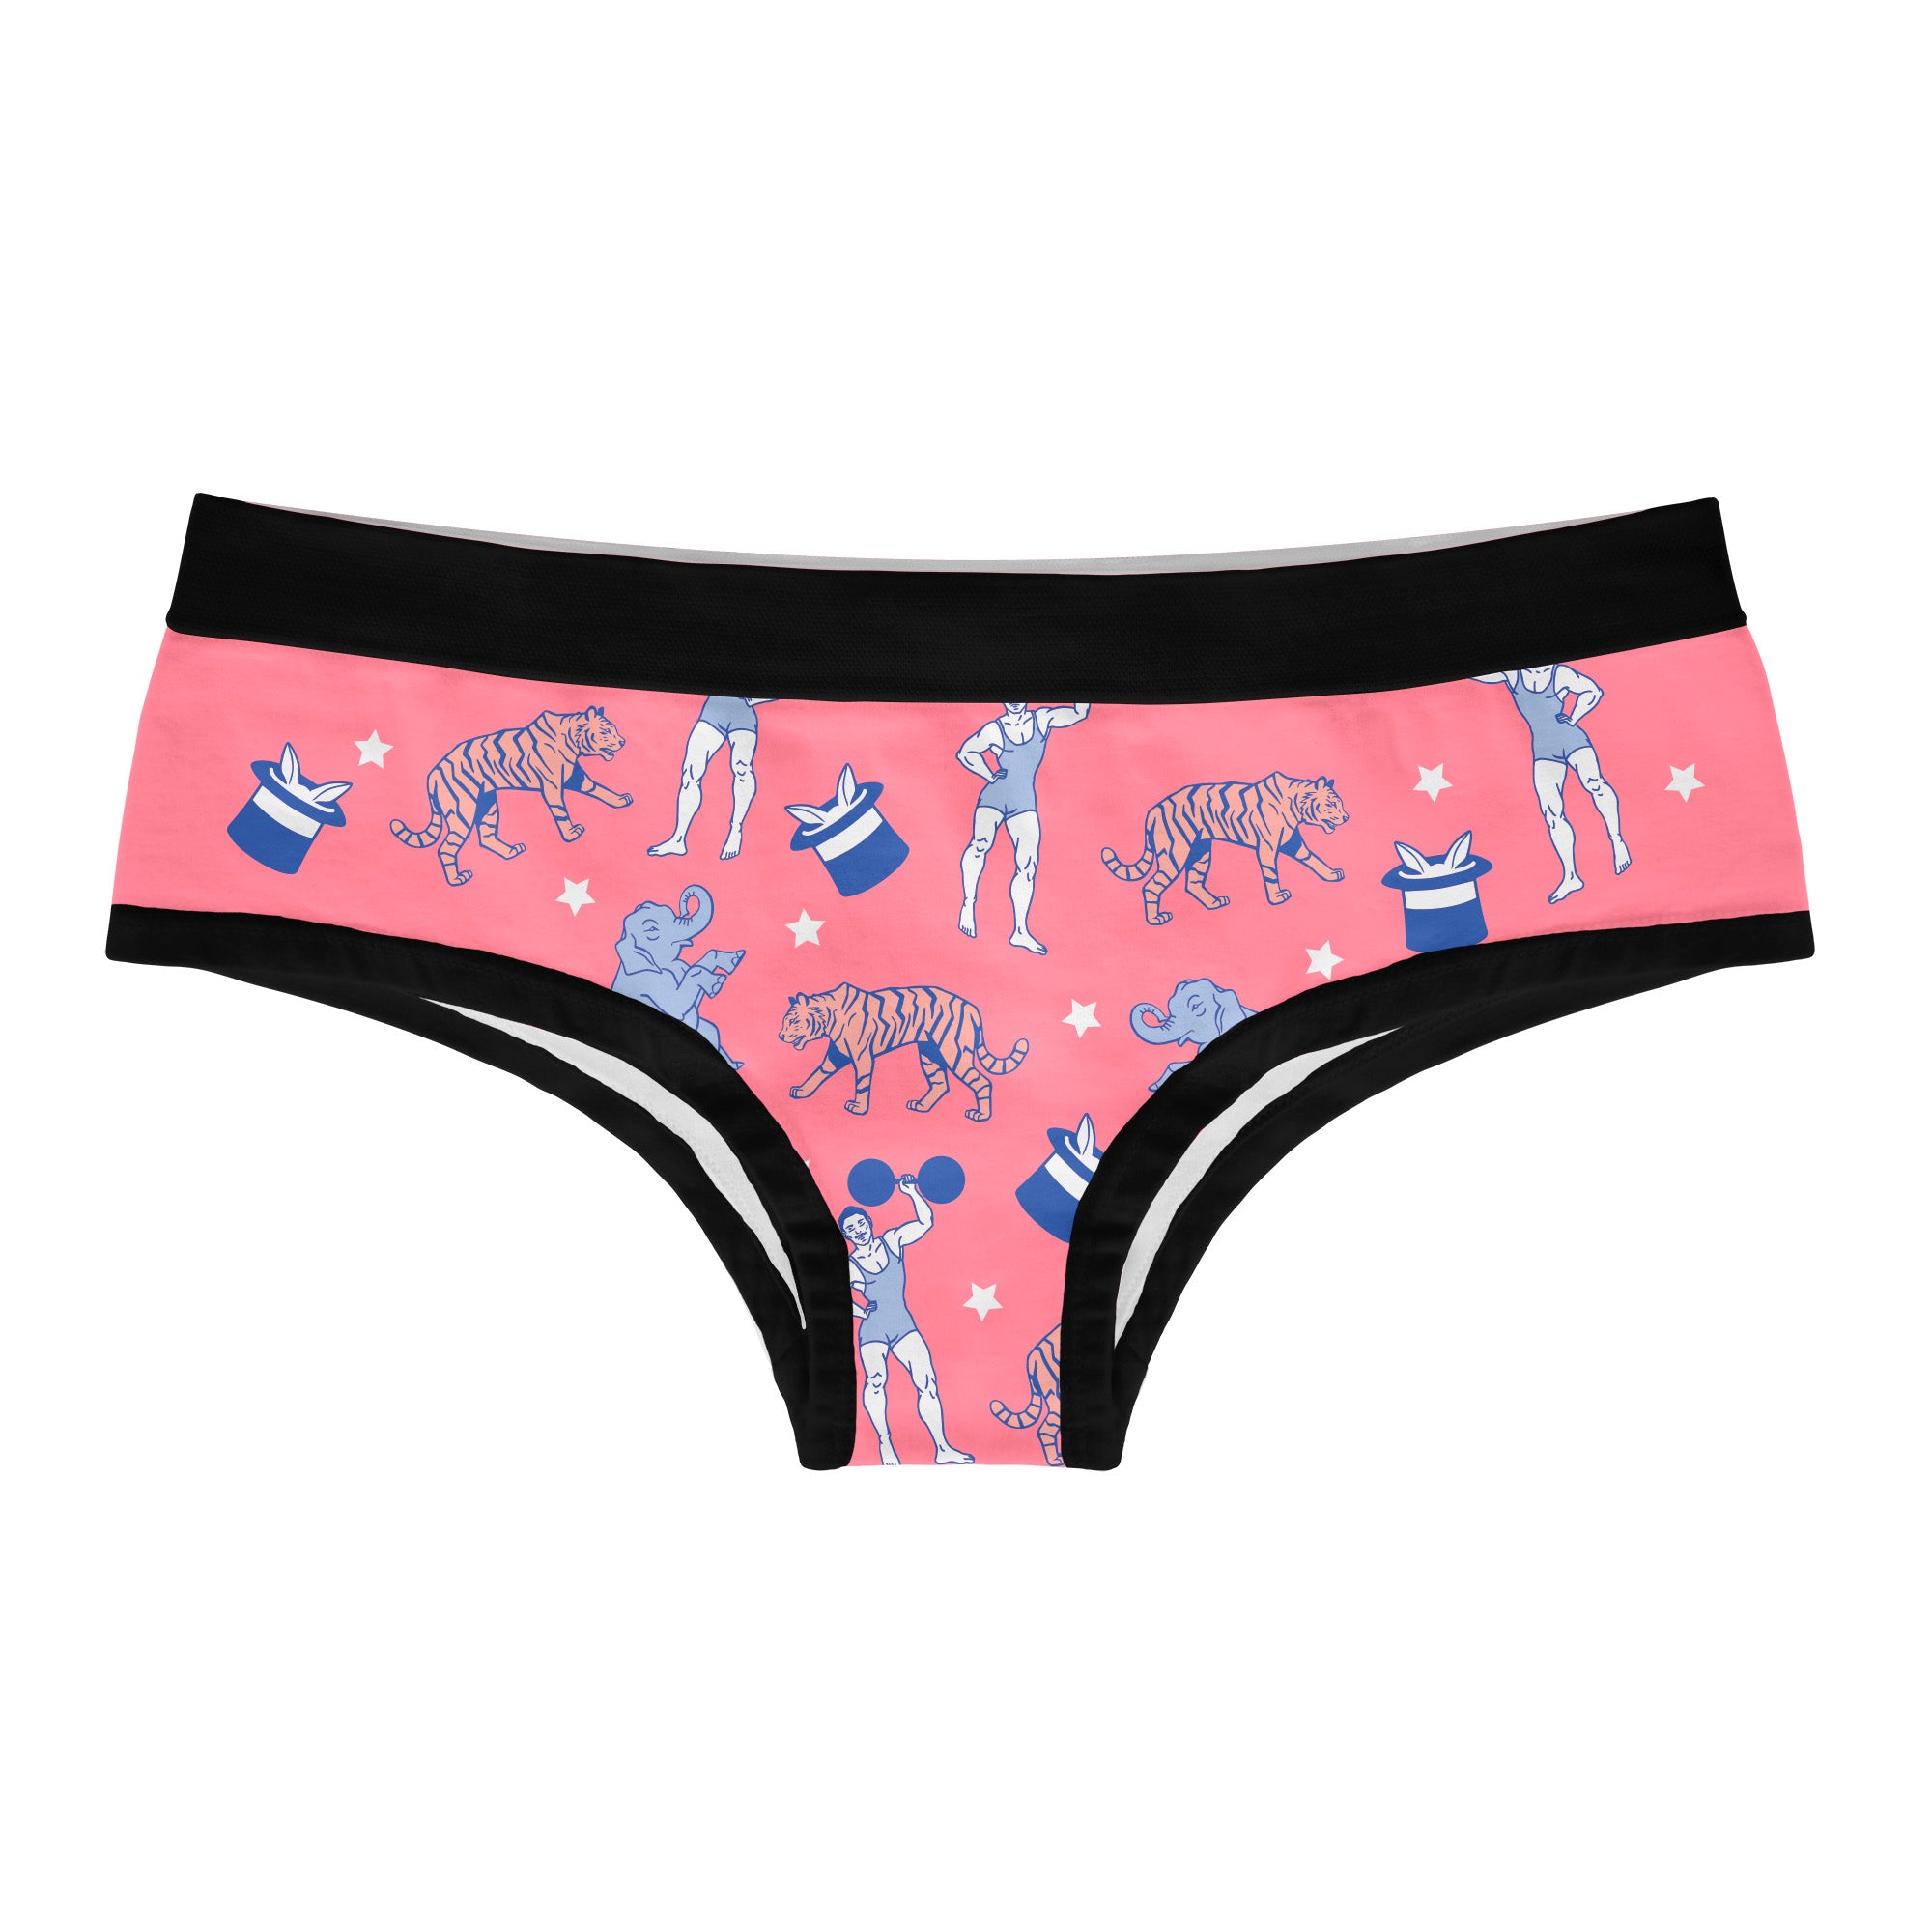 Best Deal for Womens Underwear Funny Panties for Women Gift Ideas